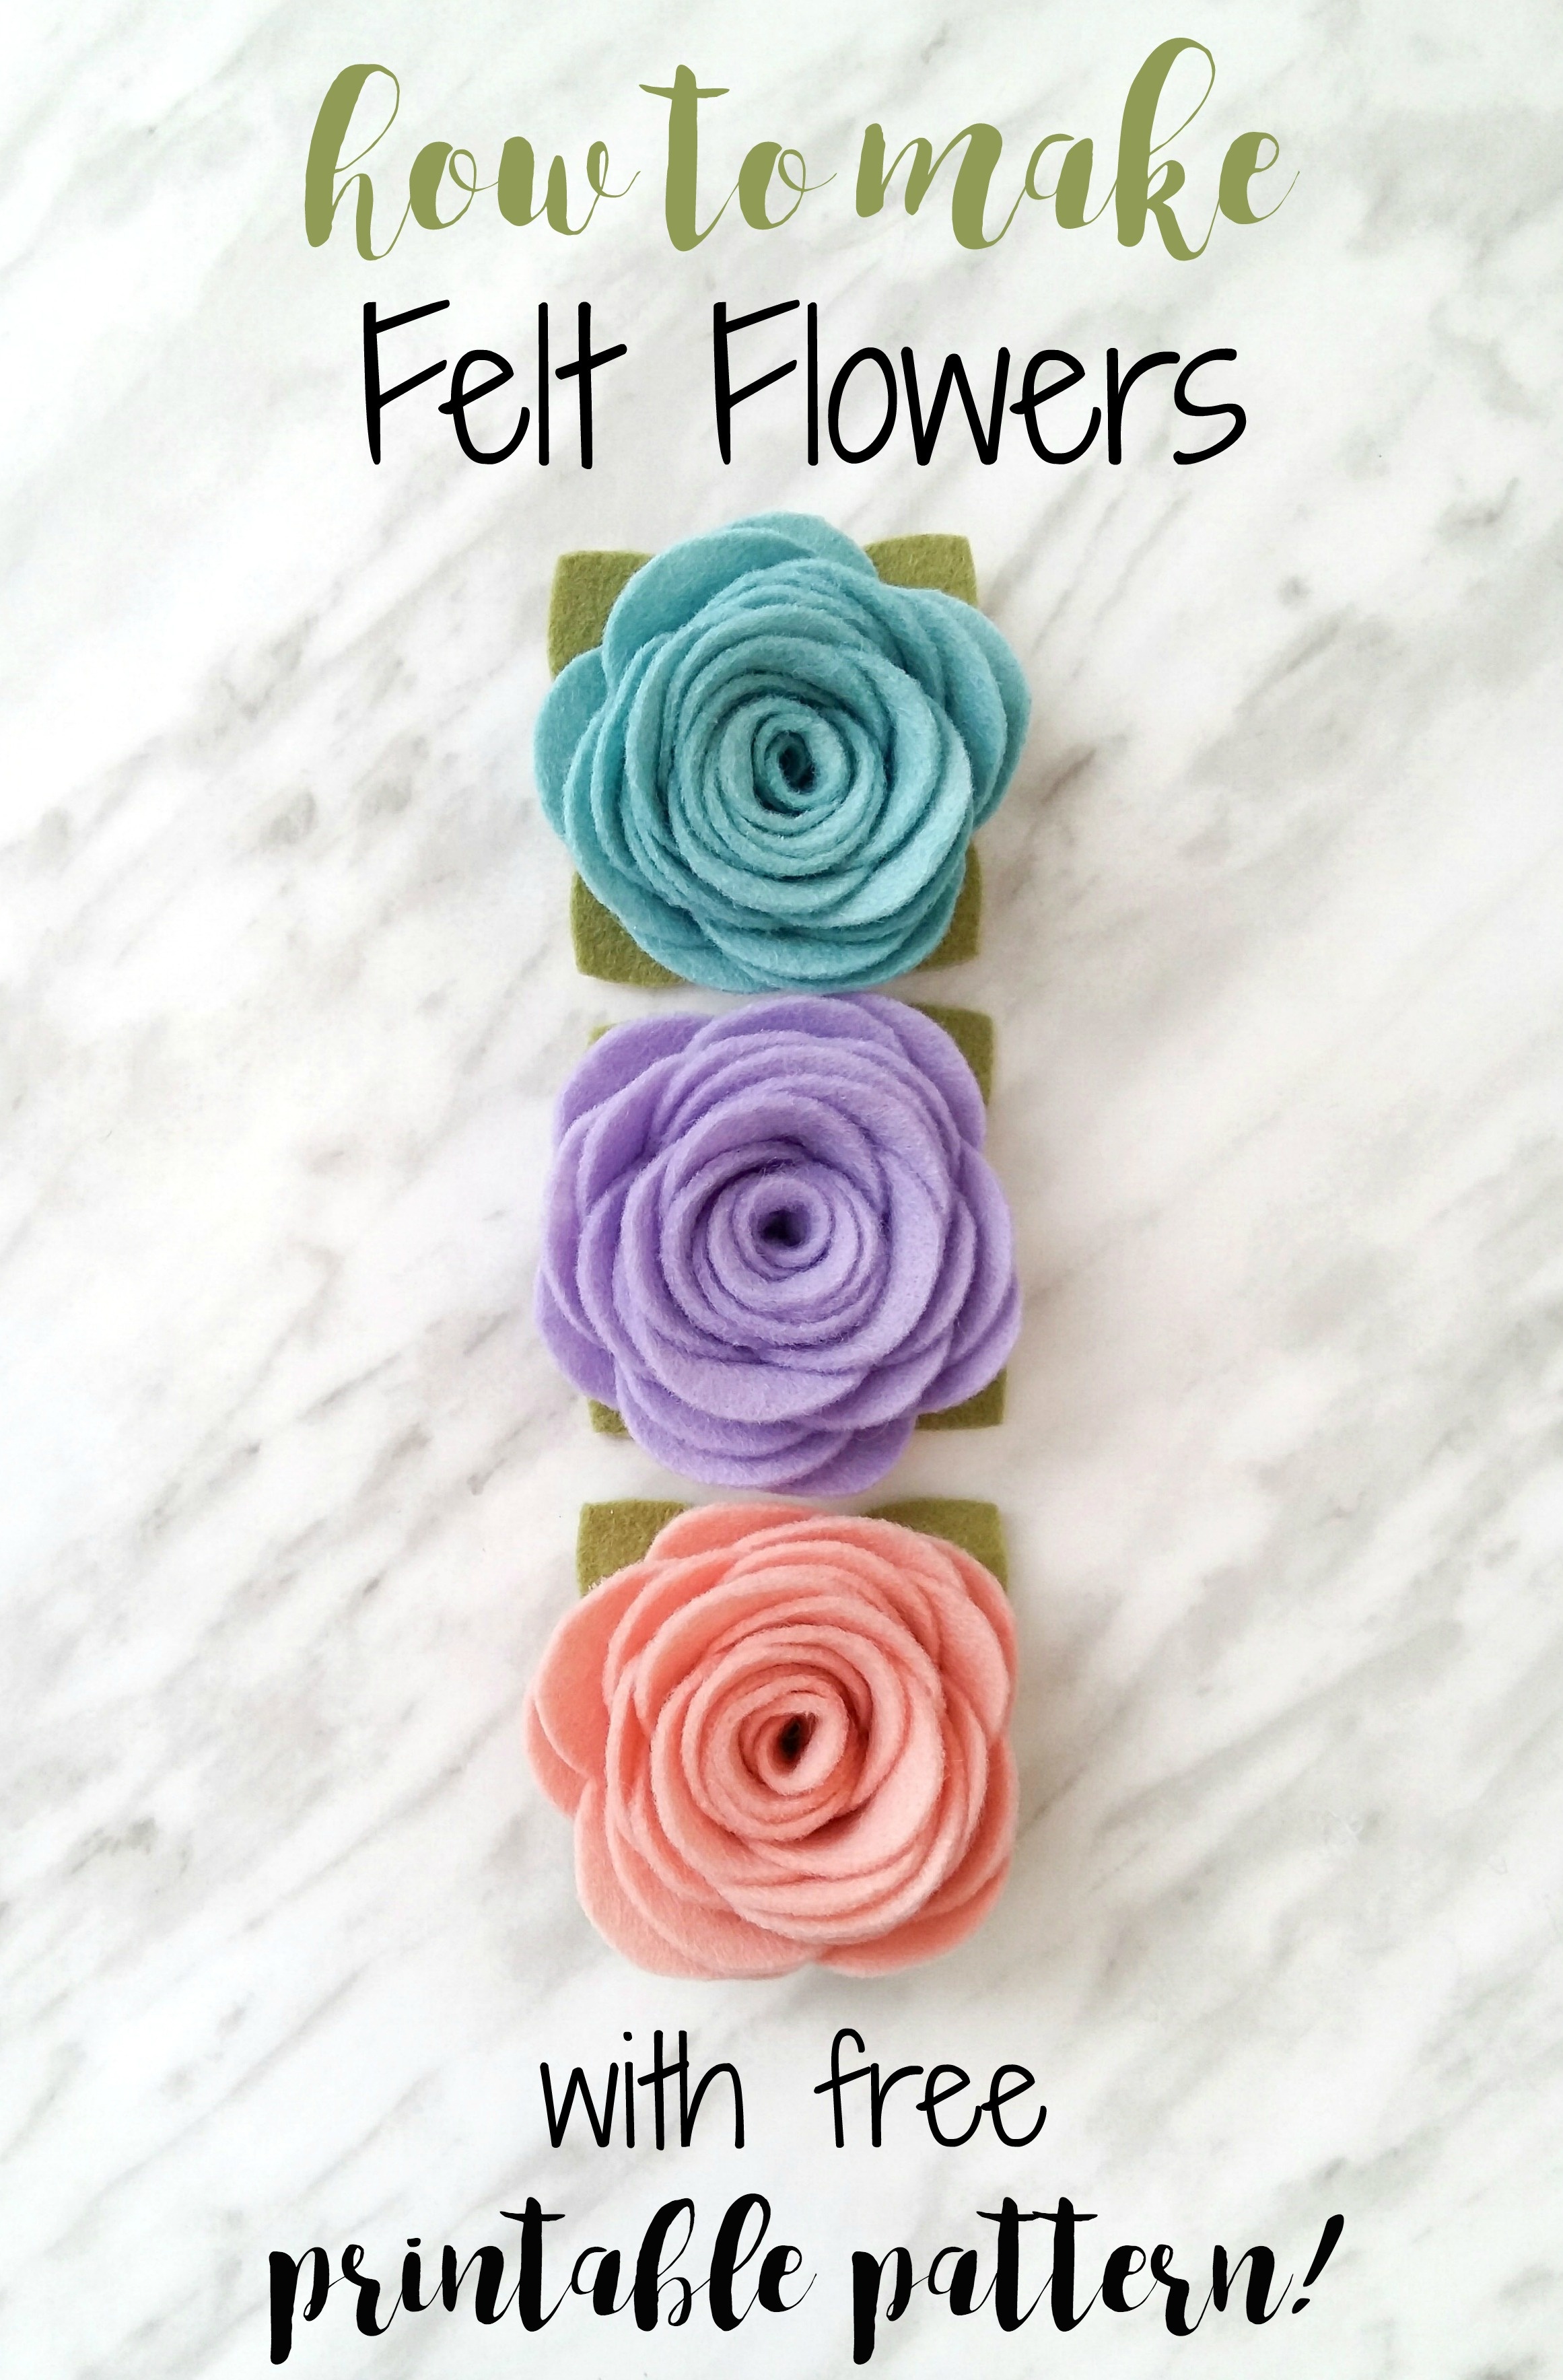 How To Make Felt Flowers - With Free Printable Pattern! | Wildflower - Free Printable Felt Patterns